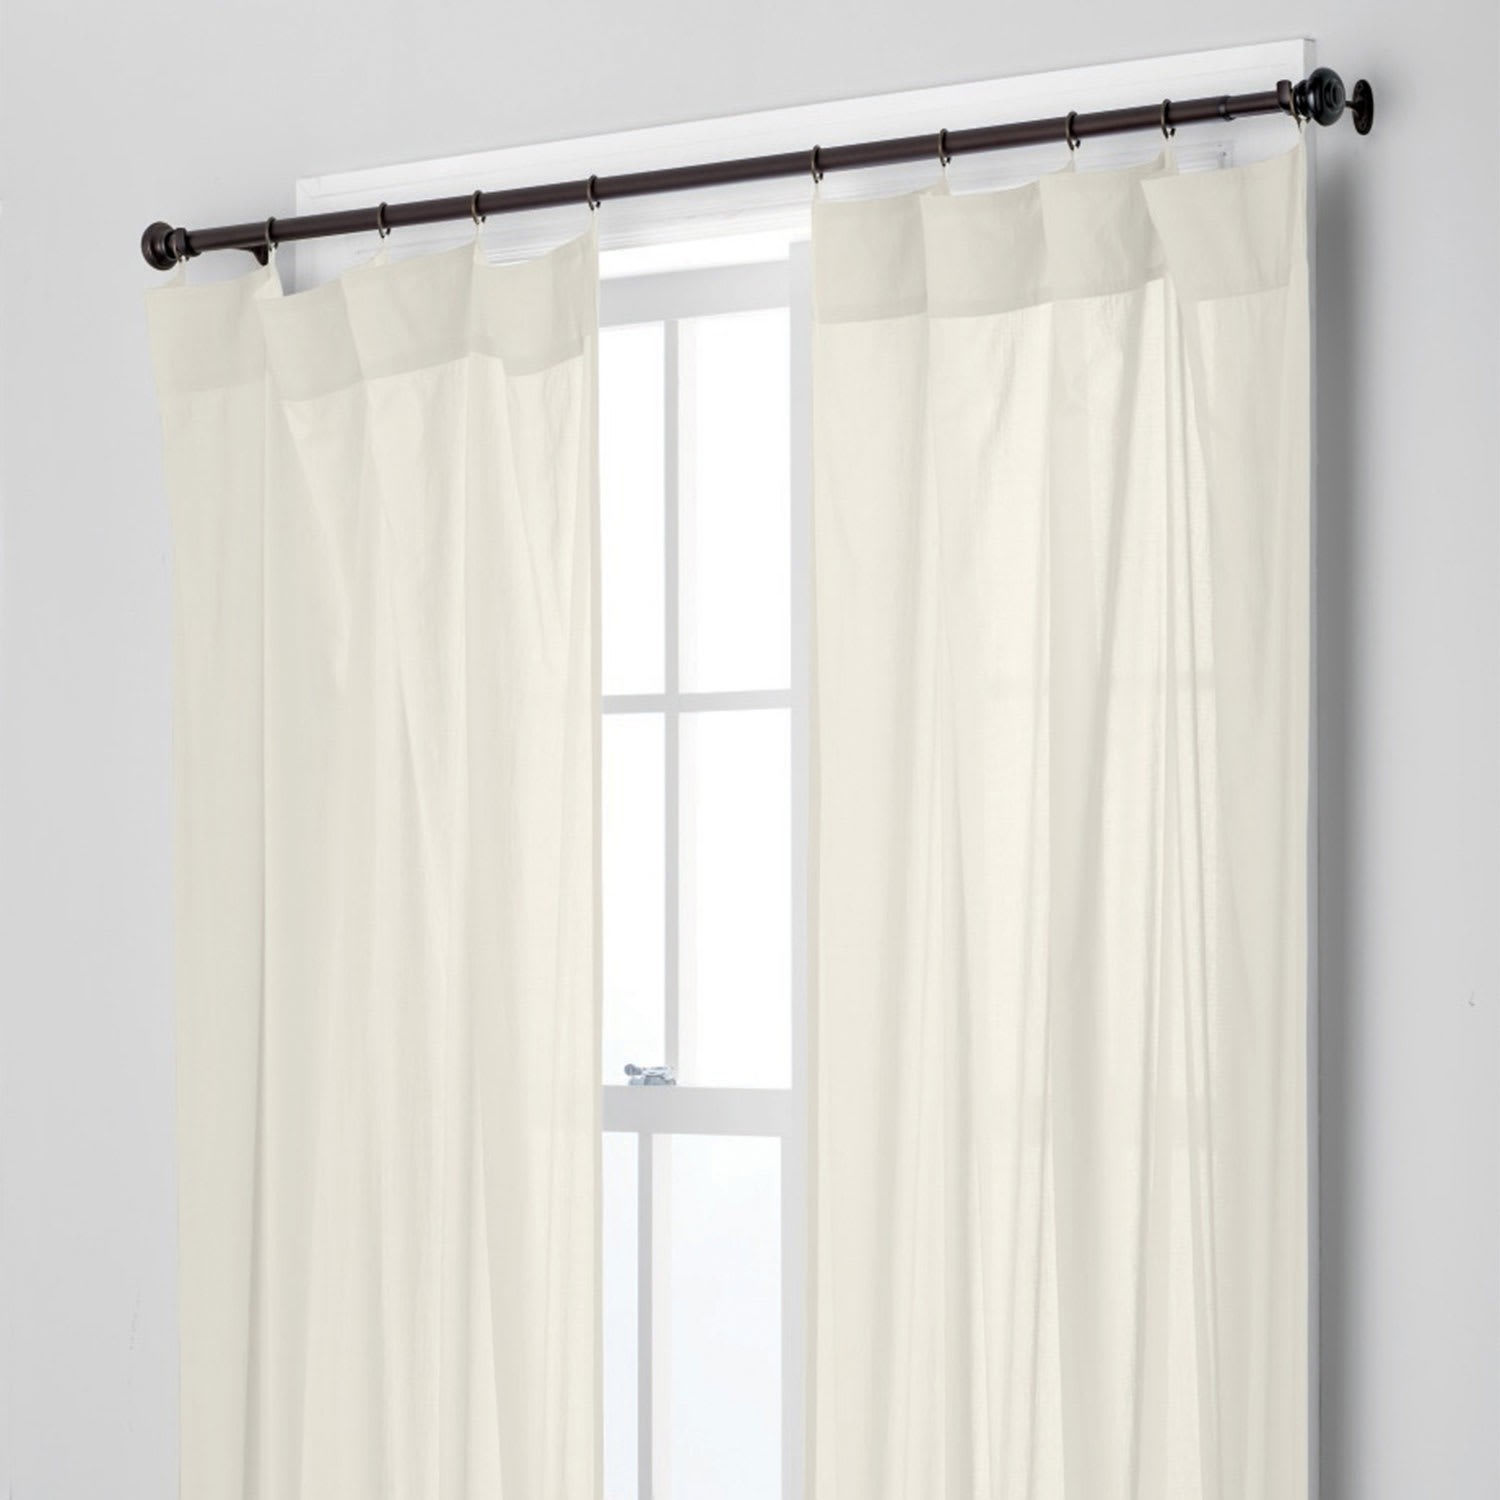 Chambray Voile Yarn-Dyed Ring Top Window Curtain - Ivory